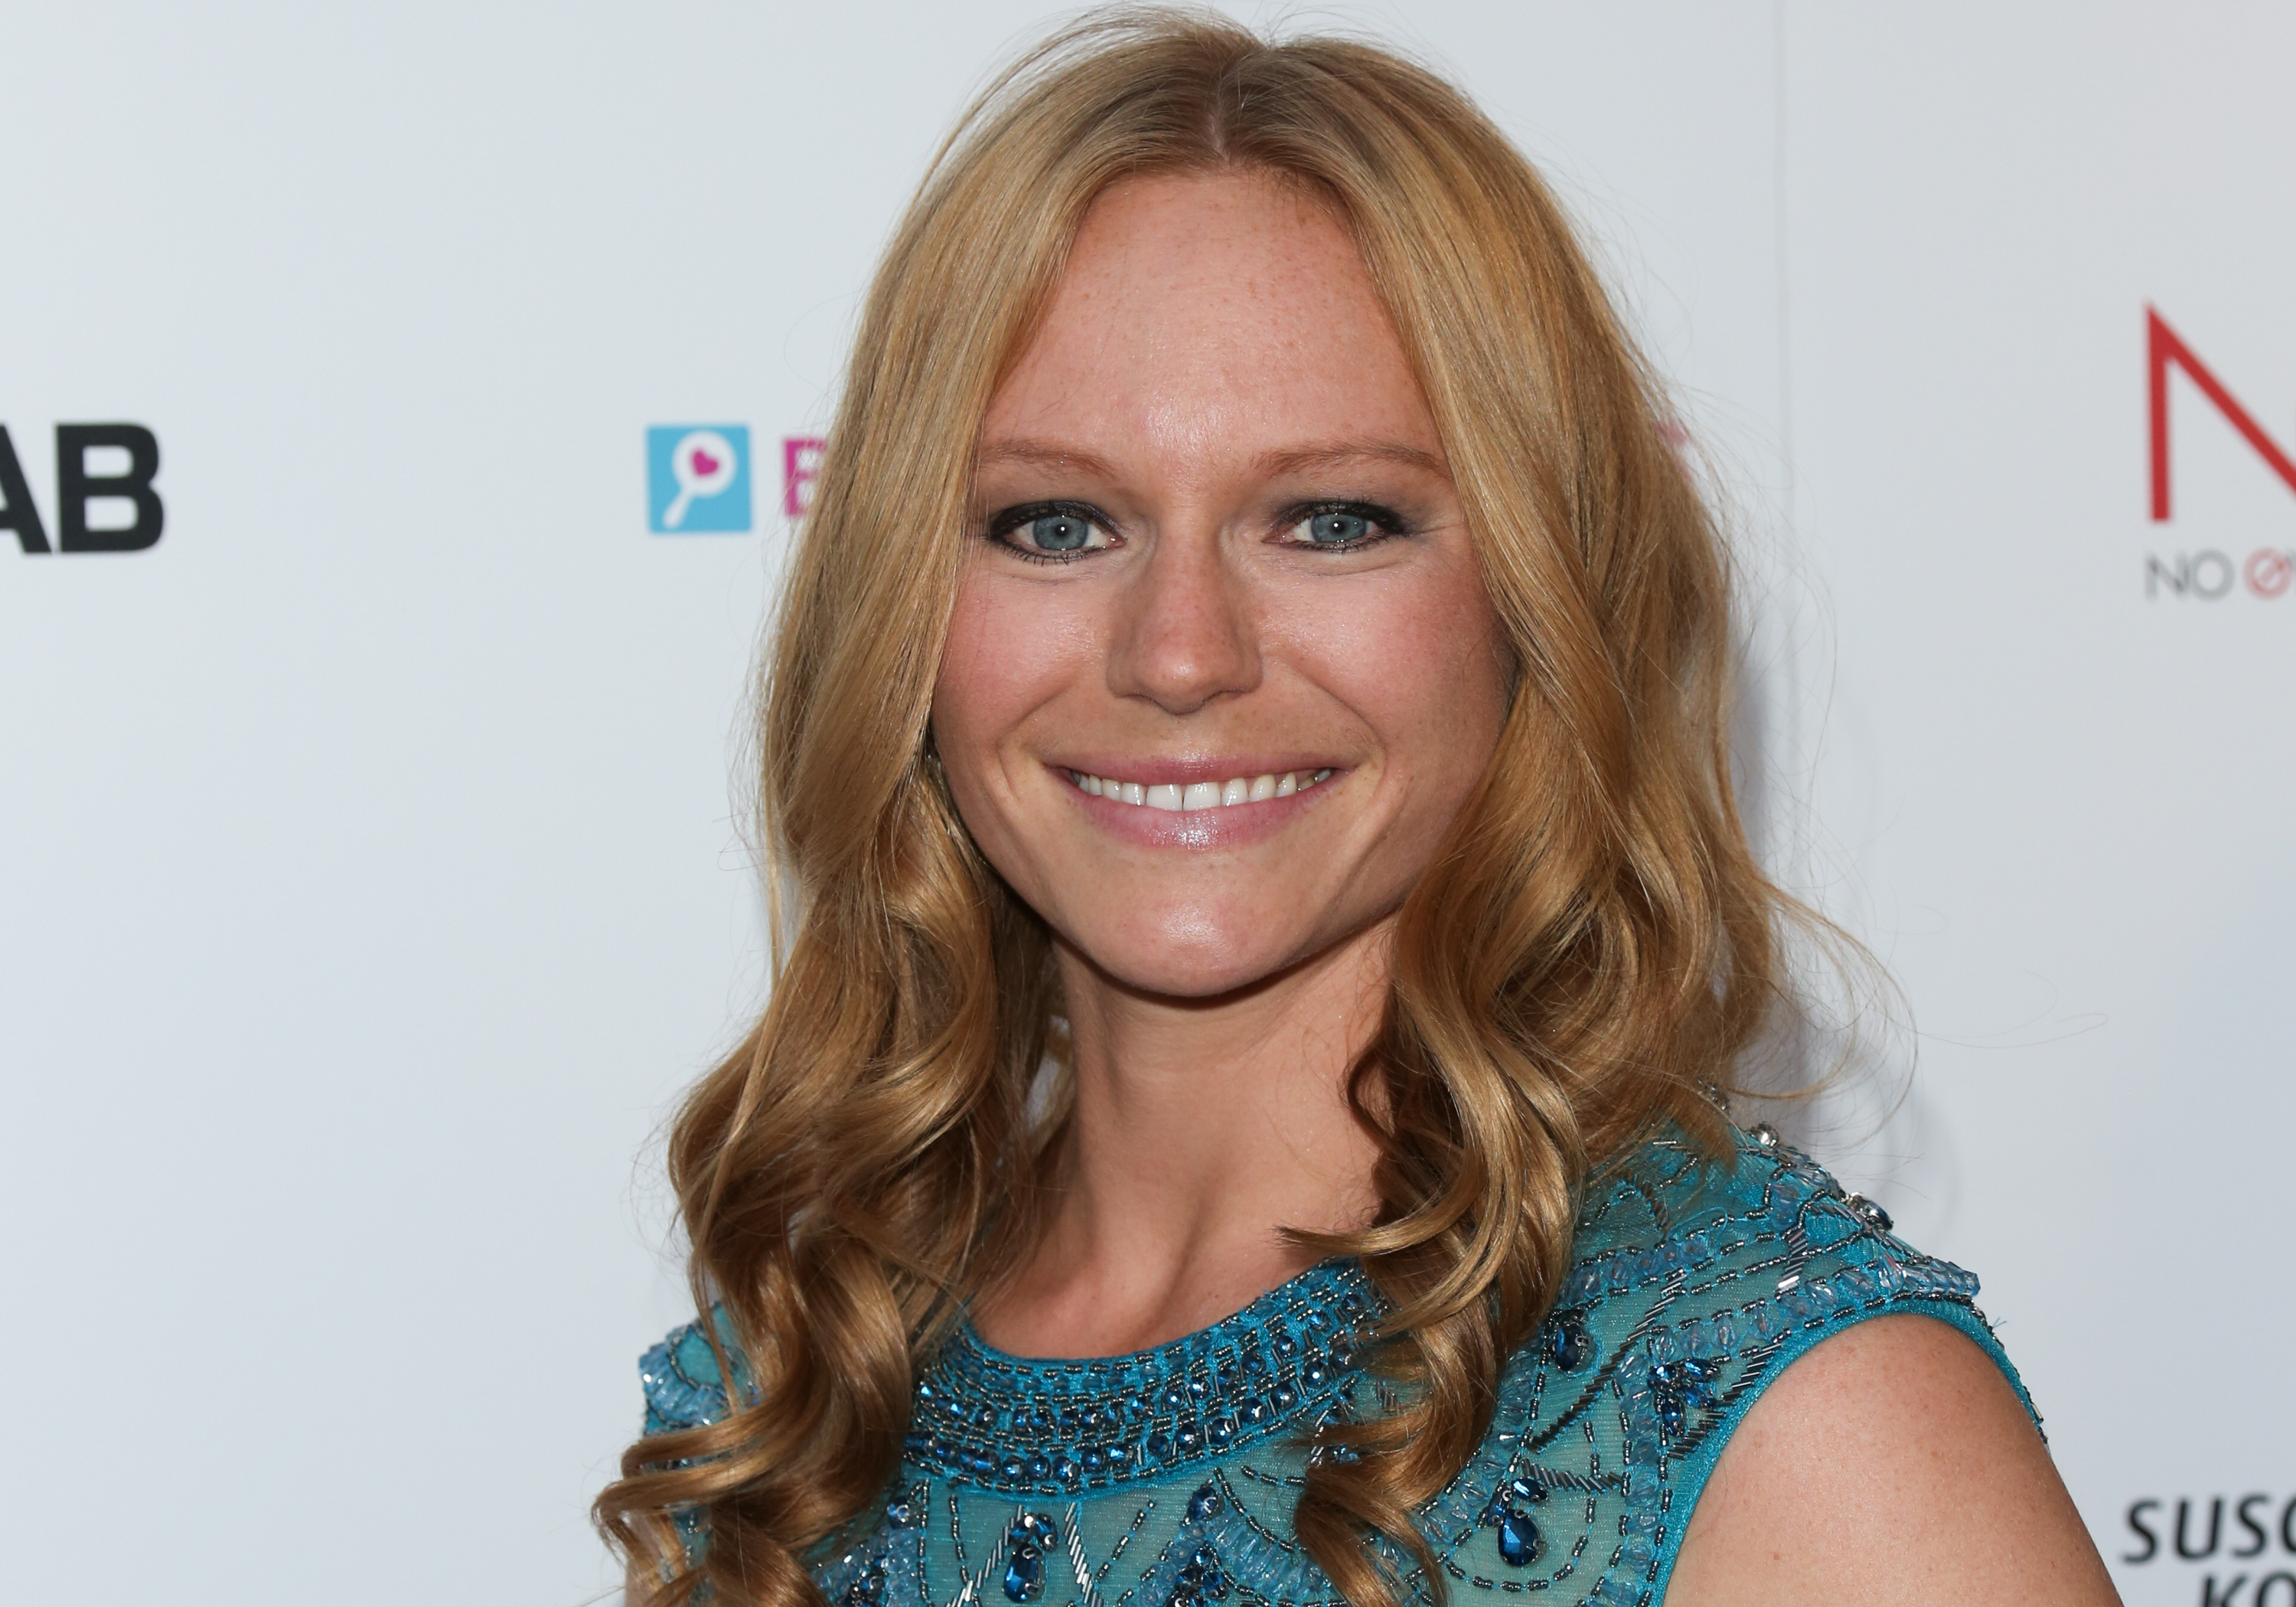 'Days of Our Lives' star Marci Miller wearing a blue dress during a red carpet appearance.